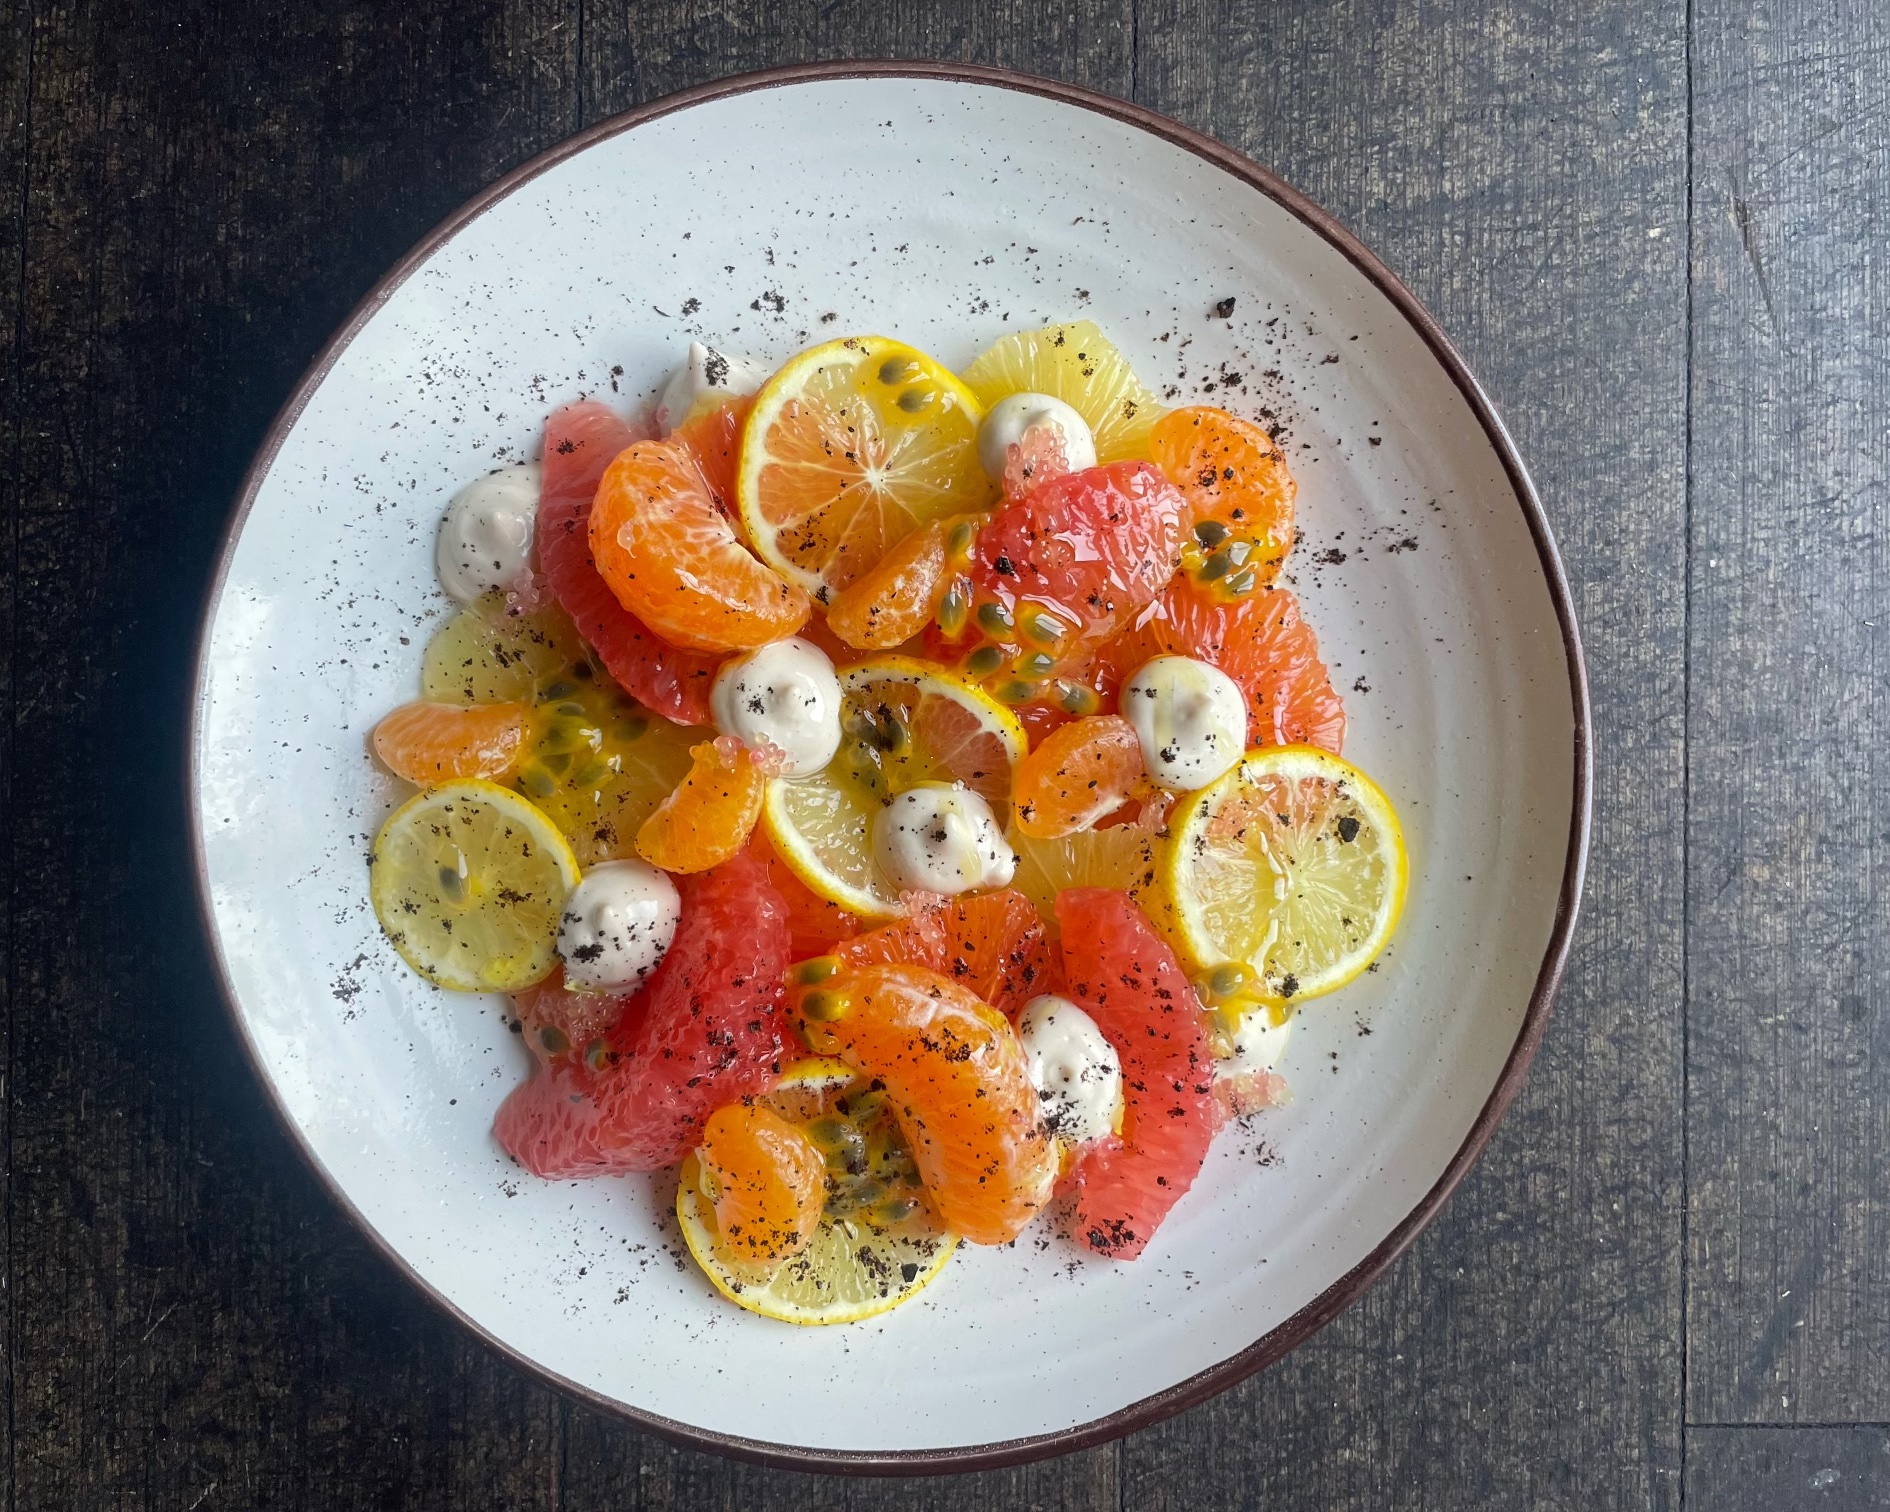 Rustic Canyon's persimmon and citrus salad.